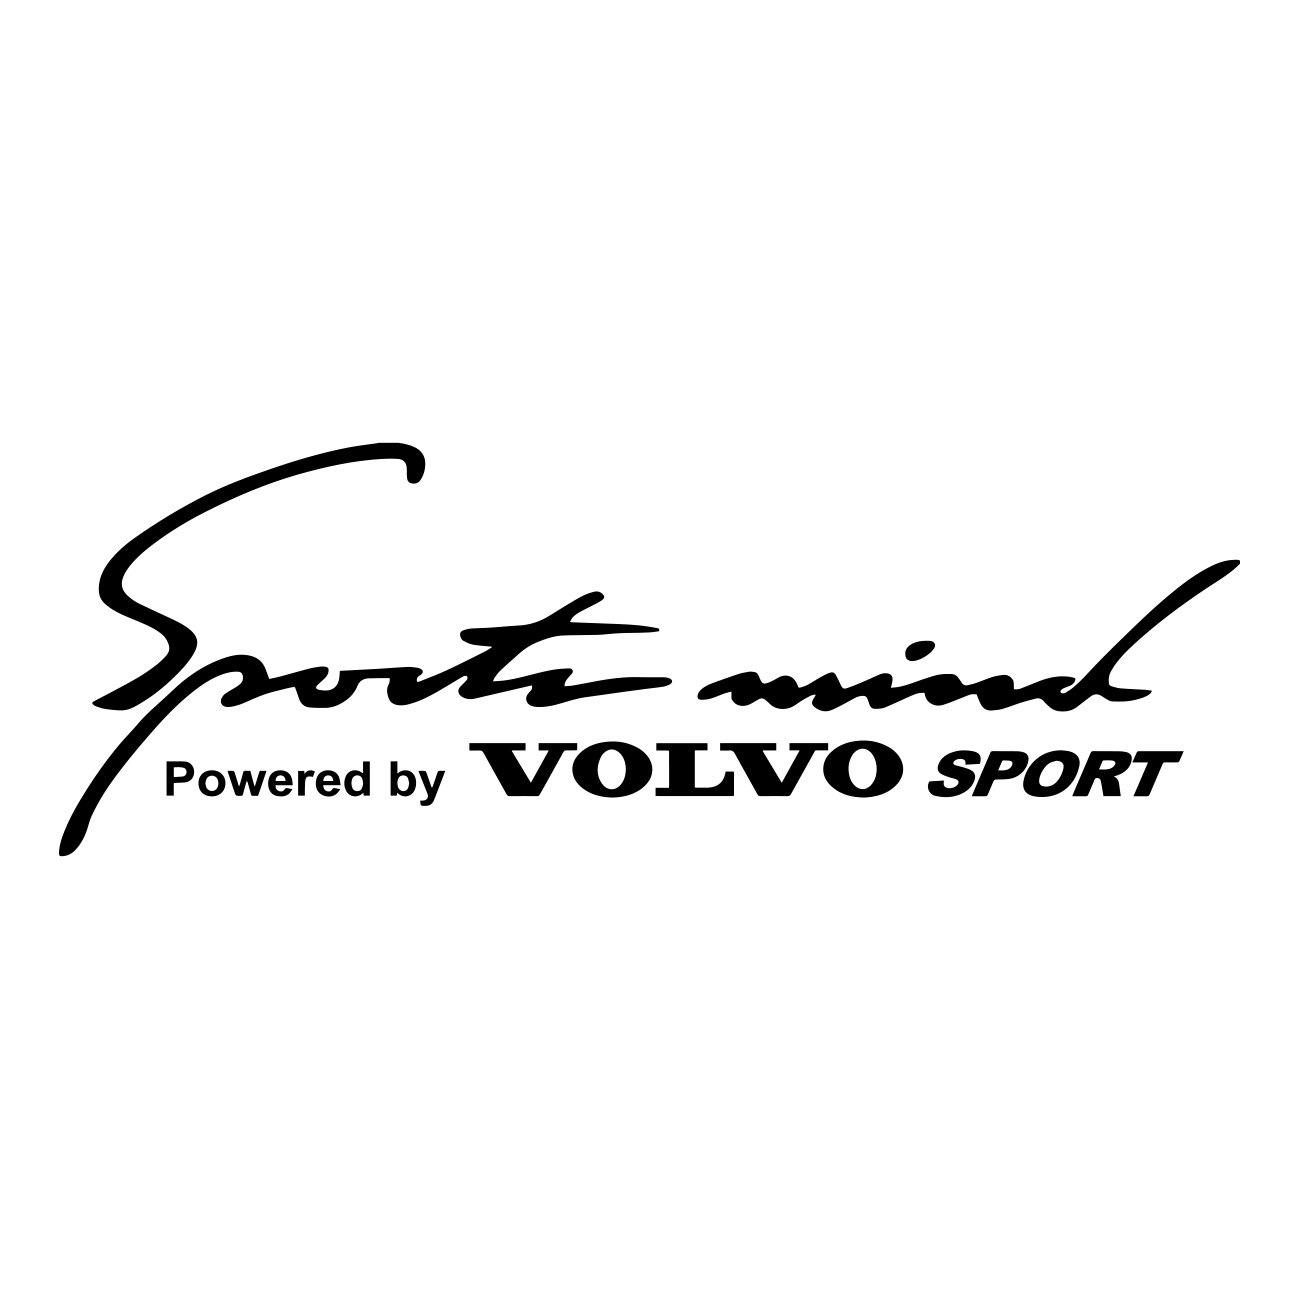 sports mind powered by volvo sport